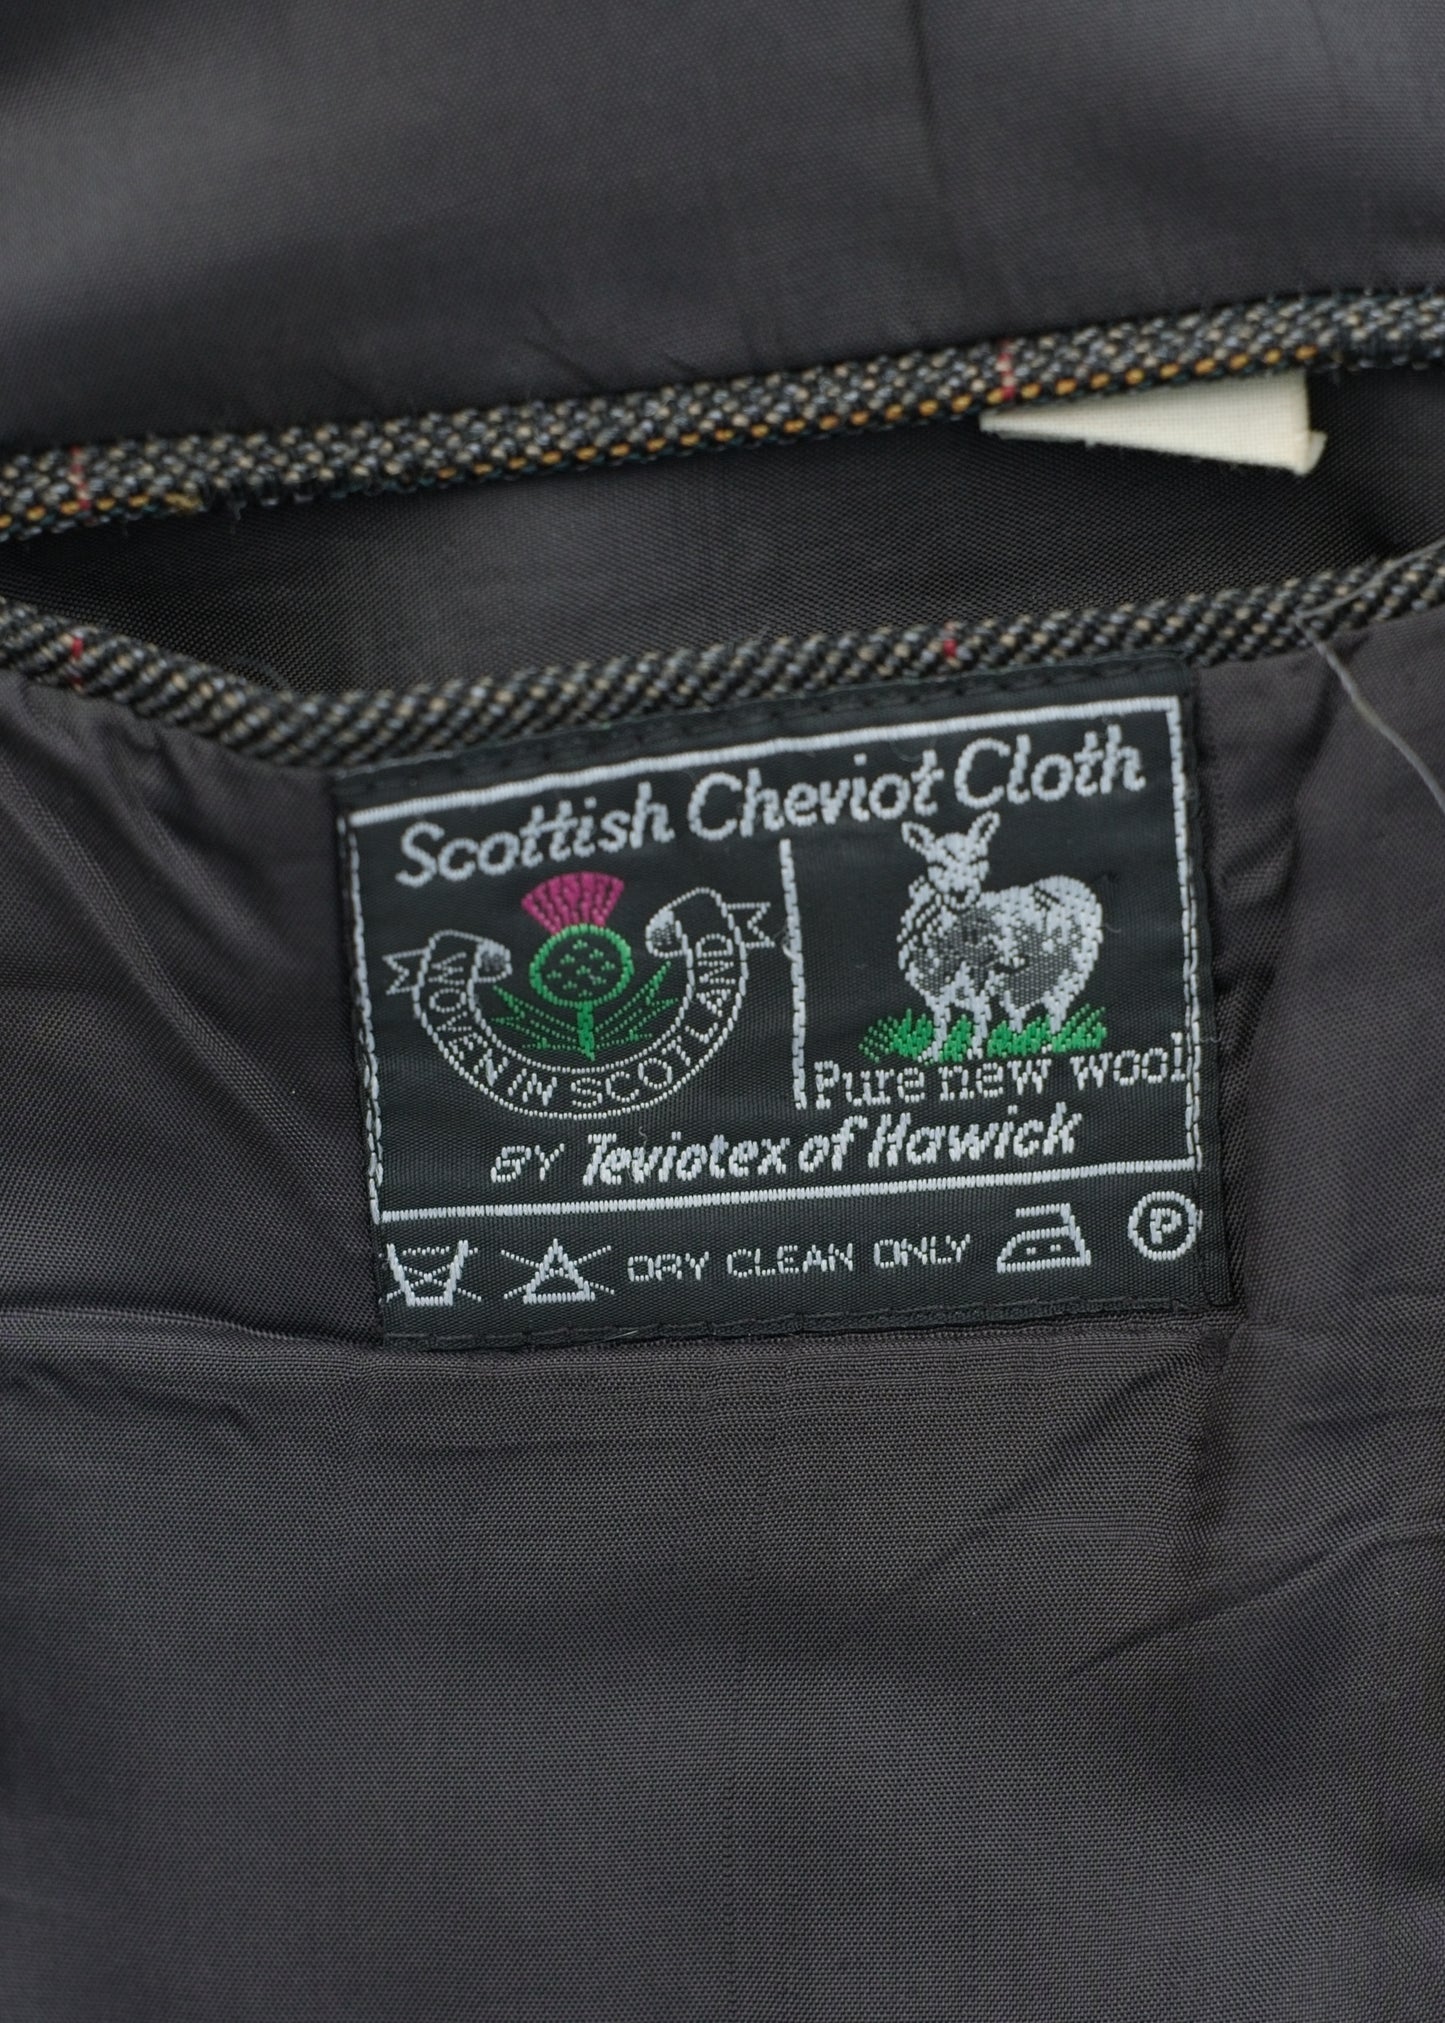 scottish cheviot cloth, pure new wool by Teviotex of Hawick